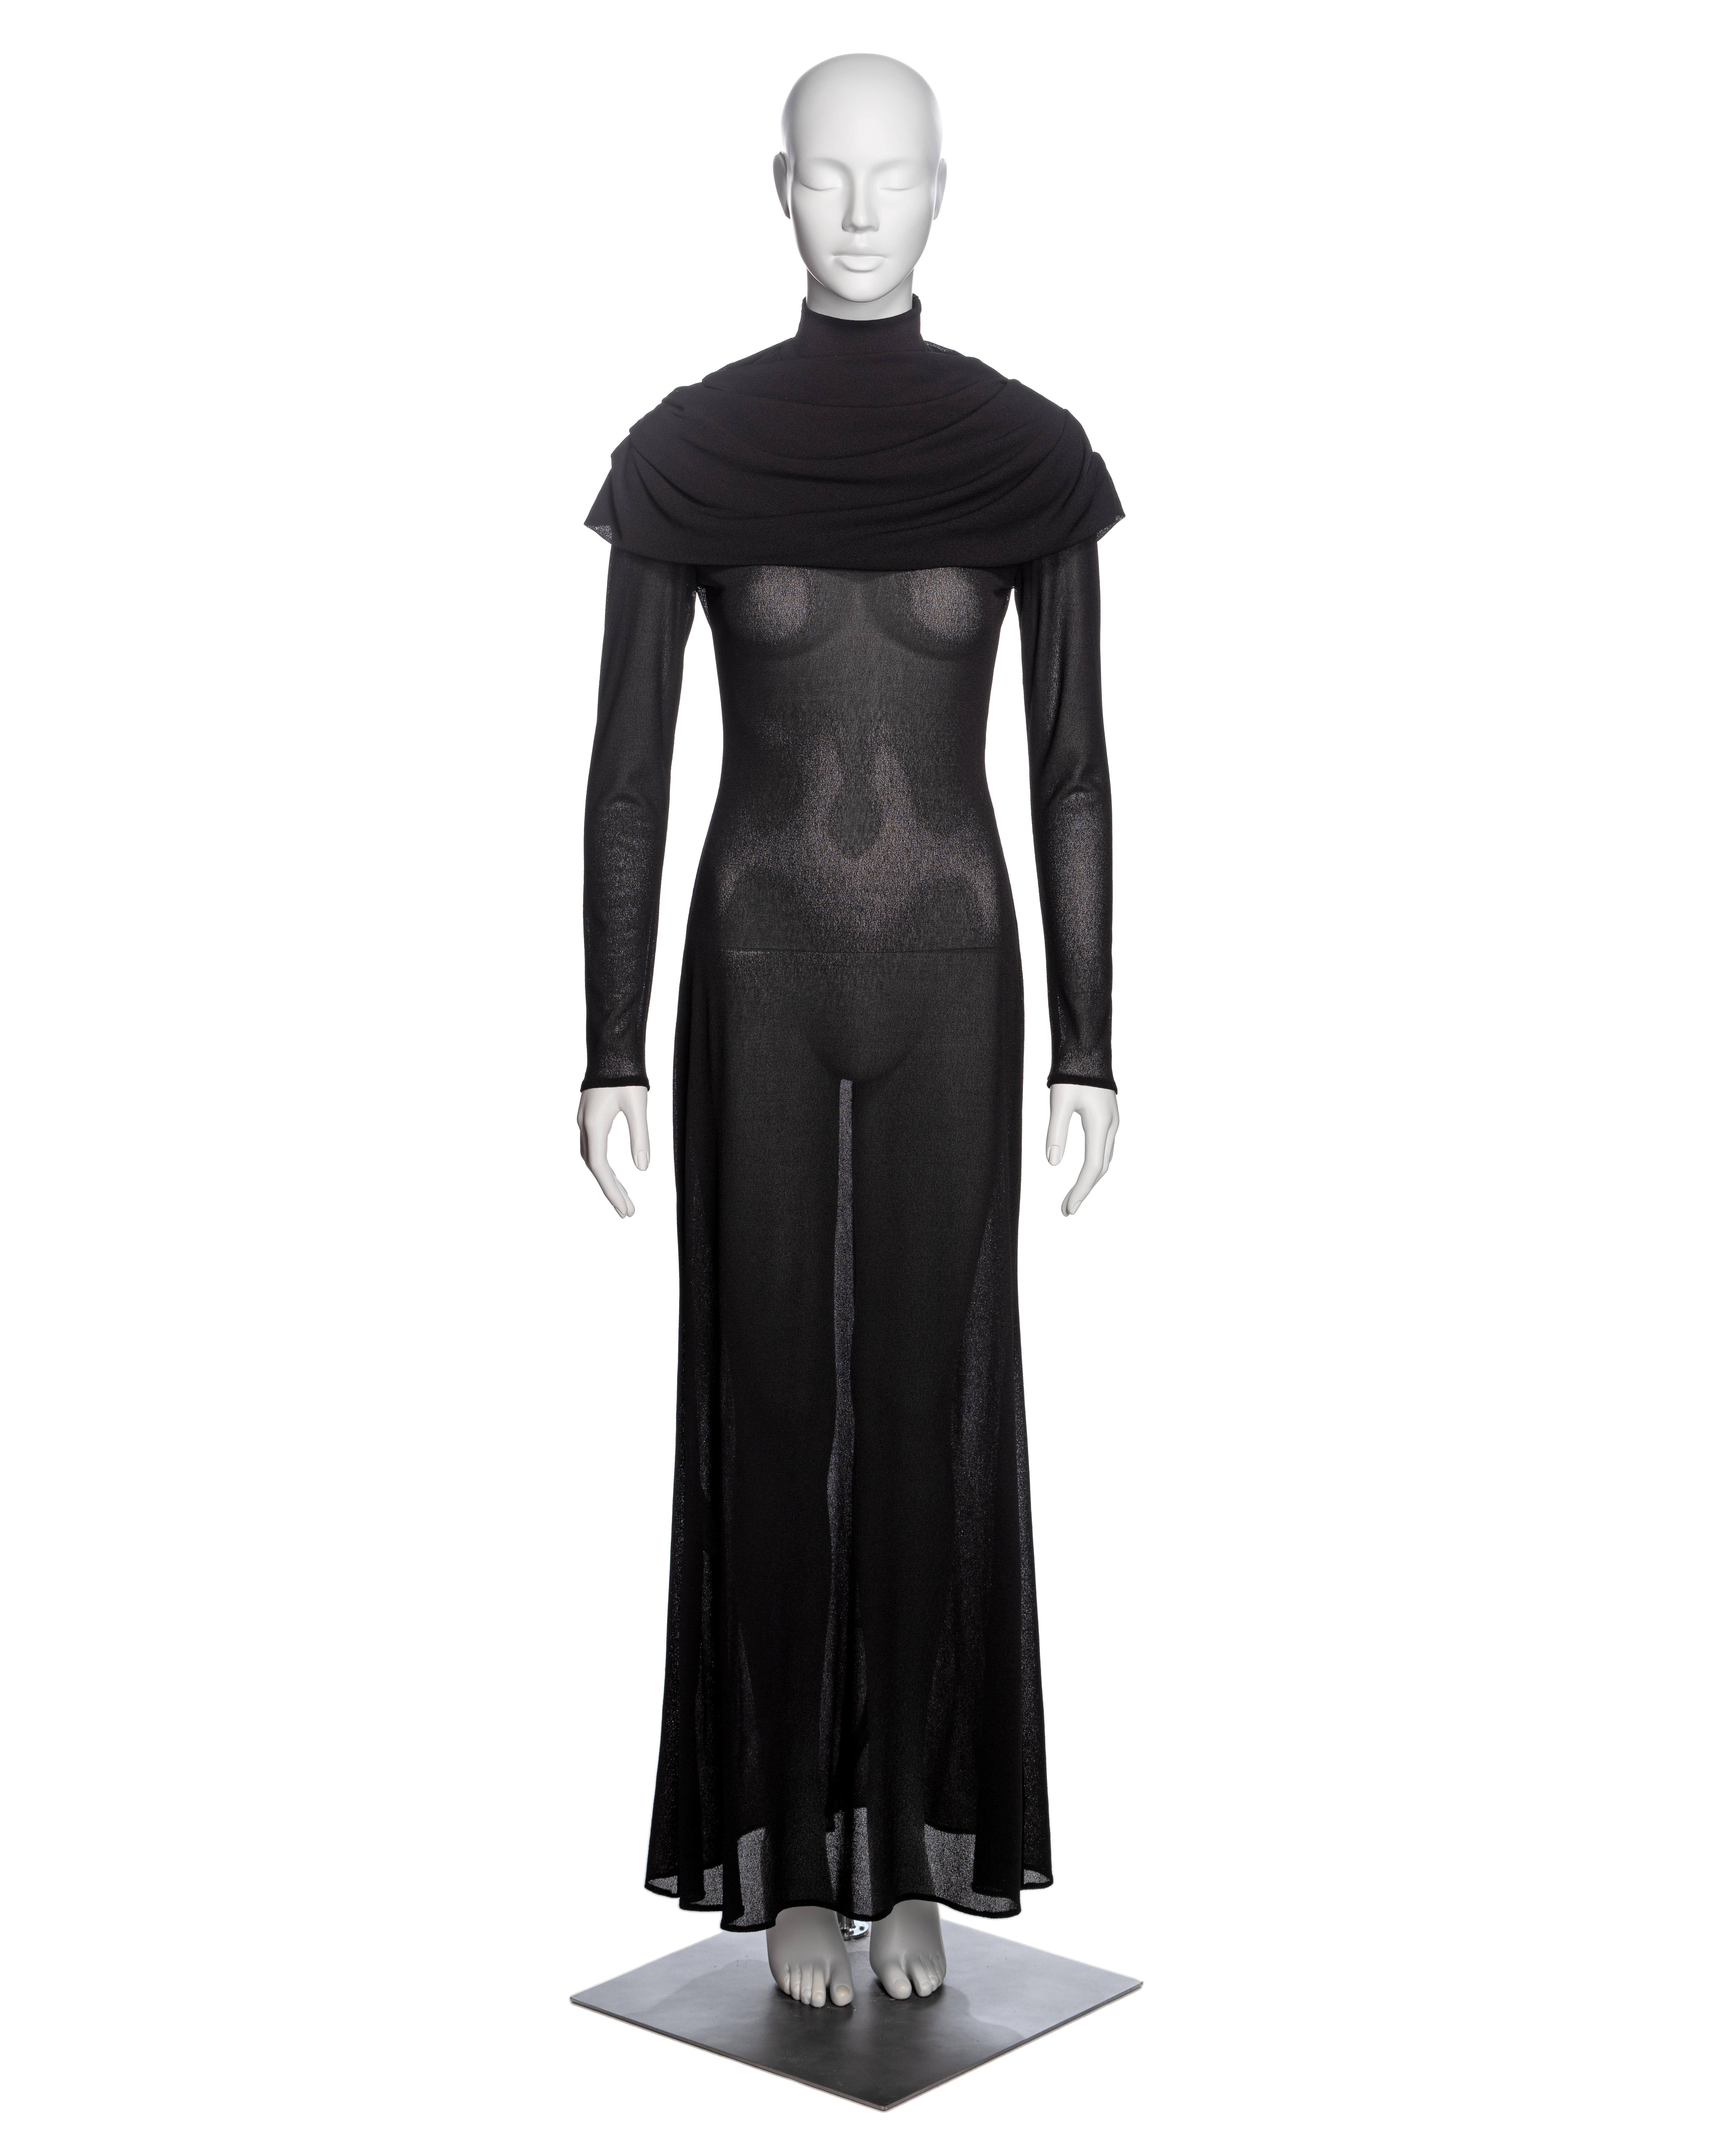 ▪ Brand: Alexander McQueen
▪ Creative Director: Lee Alexander McQueen
▪ Collection: Fall-Winter 1998
▪ Sold by: One of a Kind Archive
▪ Fabric: Black polyester crepe
▪ Details: Mock neck with a built-in draped cowl, long fitted sleeves with